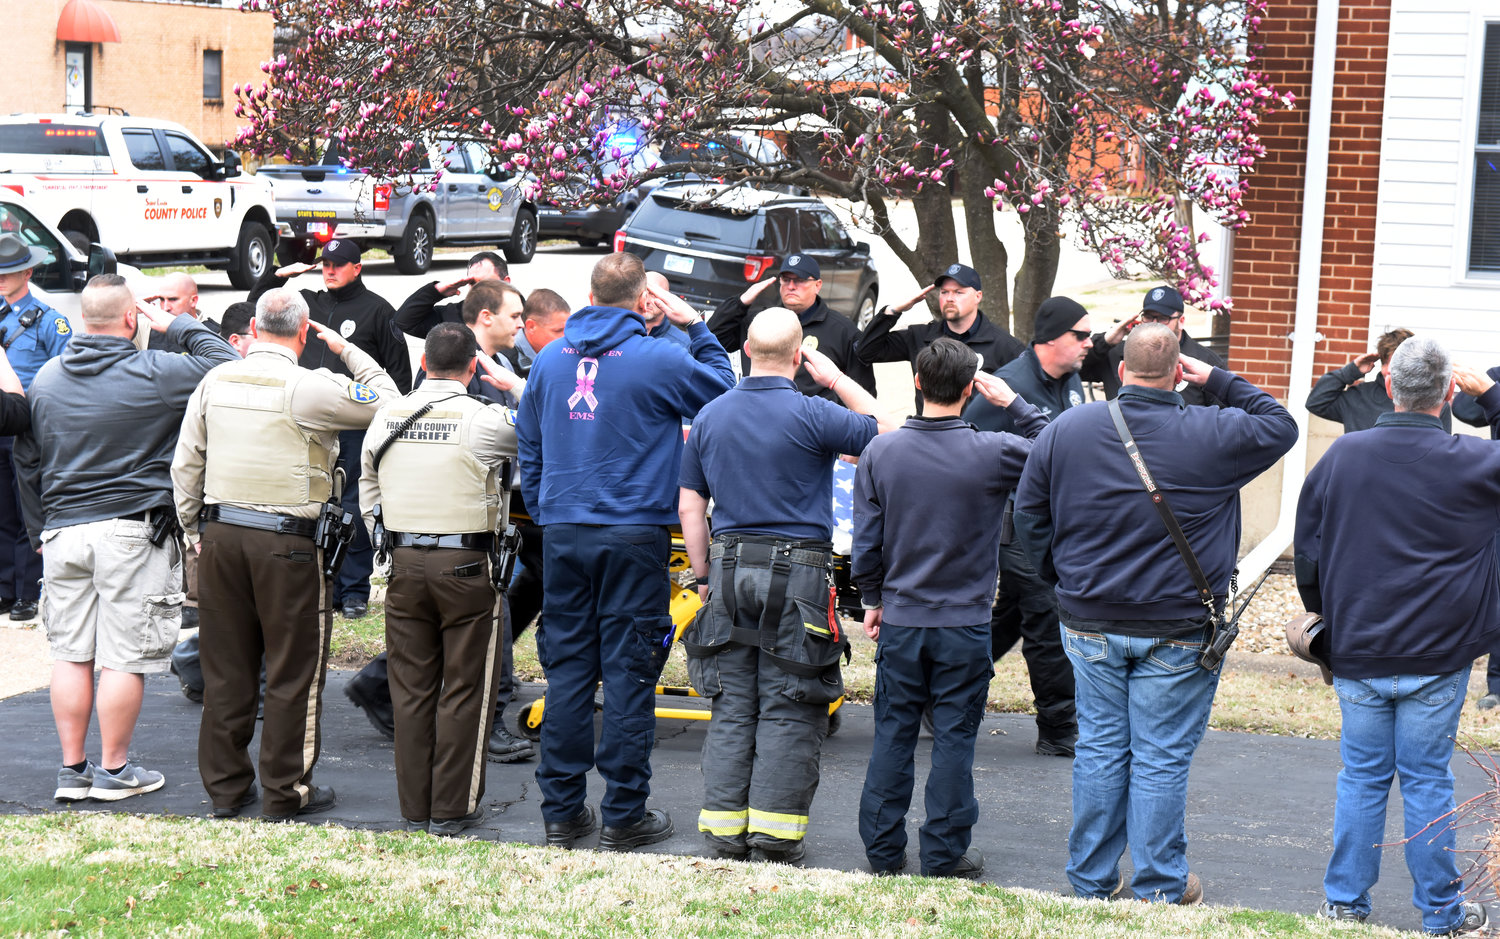 Law enforcement personnel from across the region salute Monday afternoon as the flag-draped body of Hermann Det. Sgt. Mason Griffith is brought to Gottenstroeter Funeral Home in Owensville following a 27-vehicle procession from St. Charles County following an autopsy. Area fire departments and ambulance districts also participated in the procession and lined Highway 28 in Owensville and Rosebud.